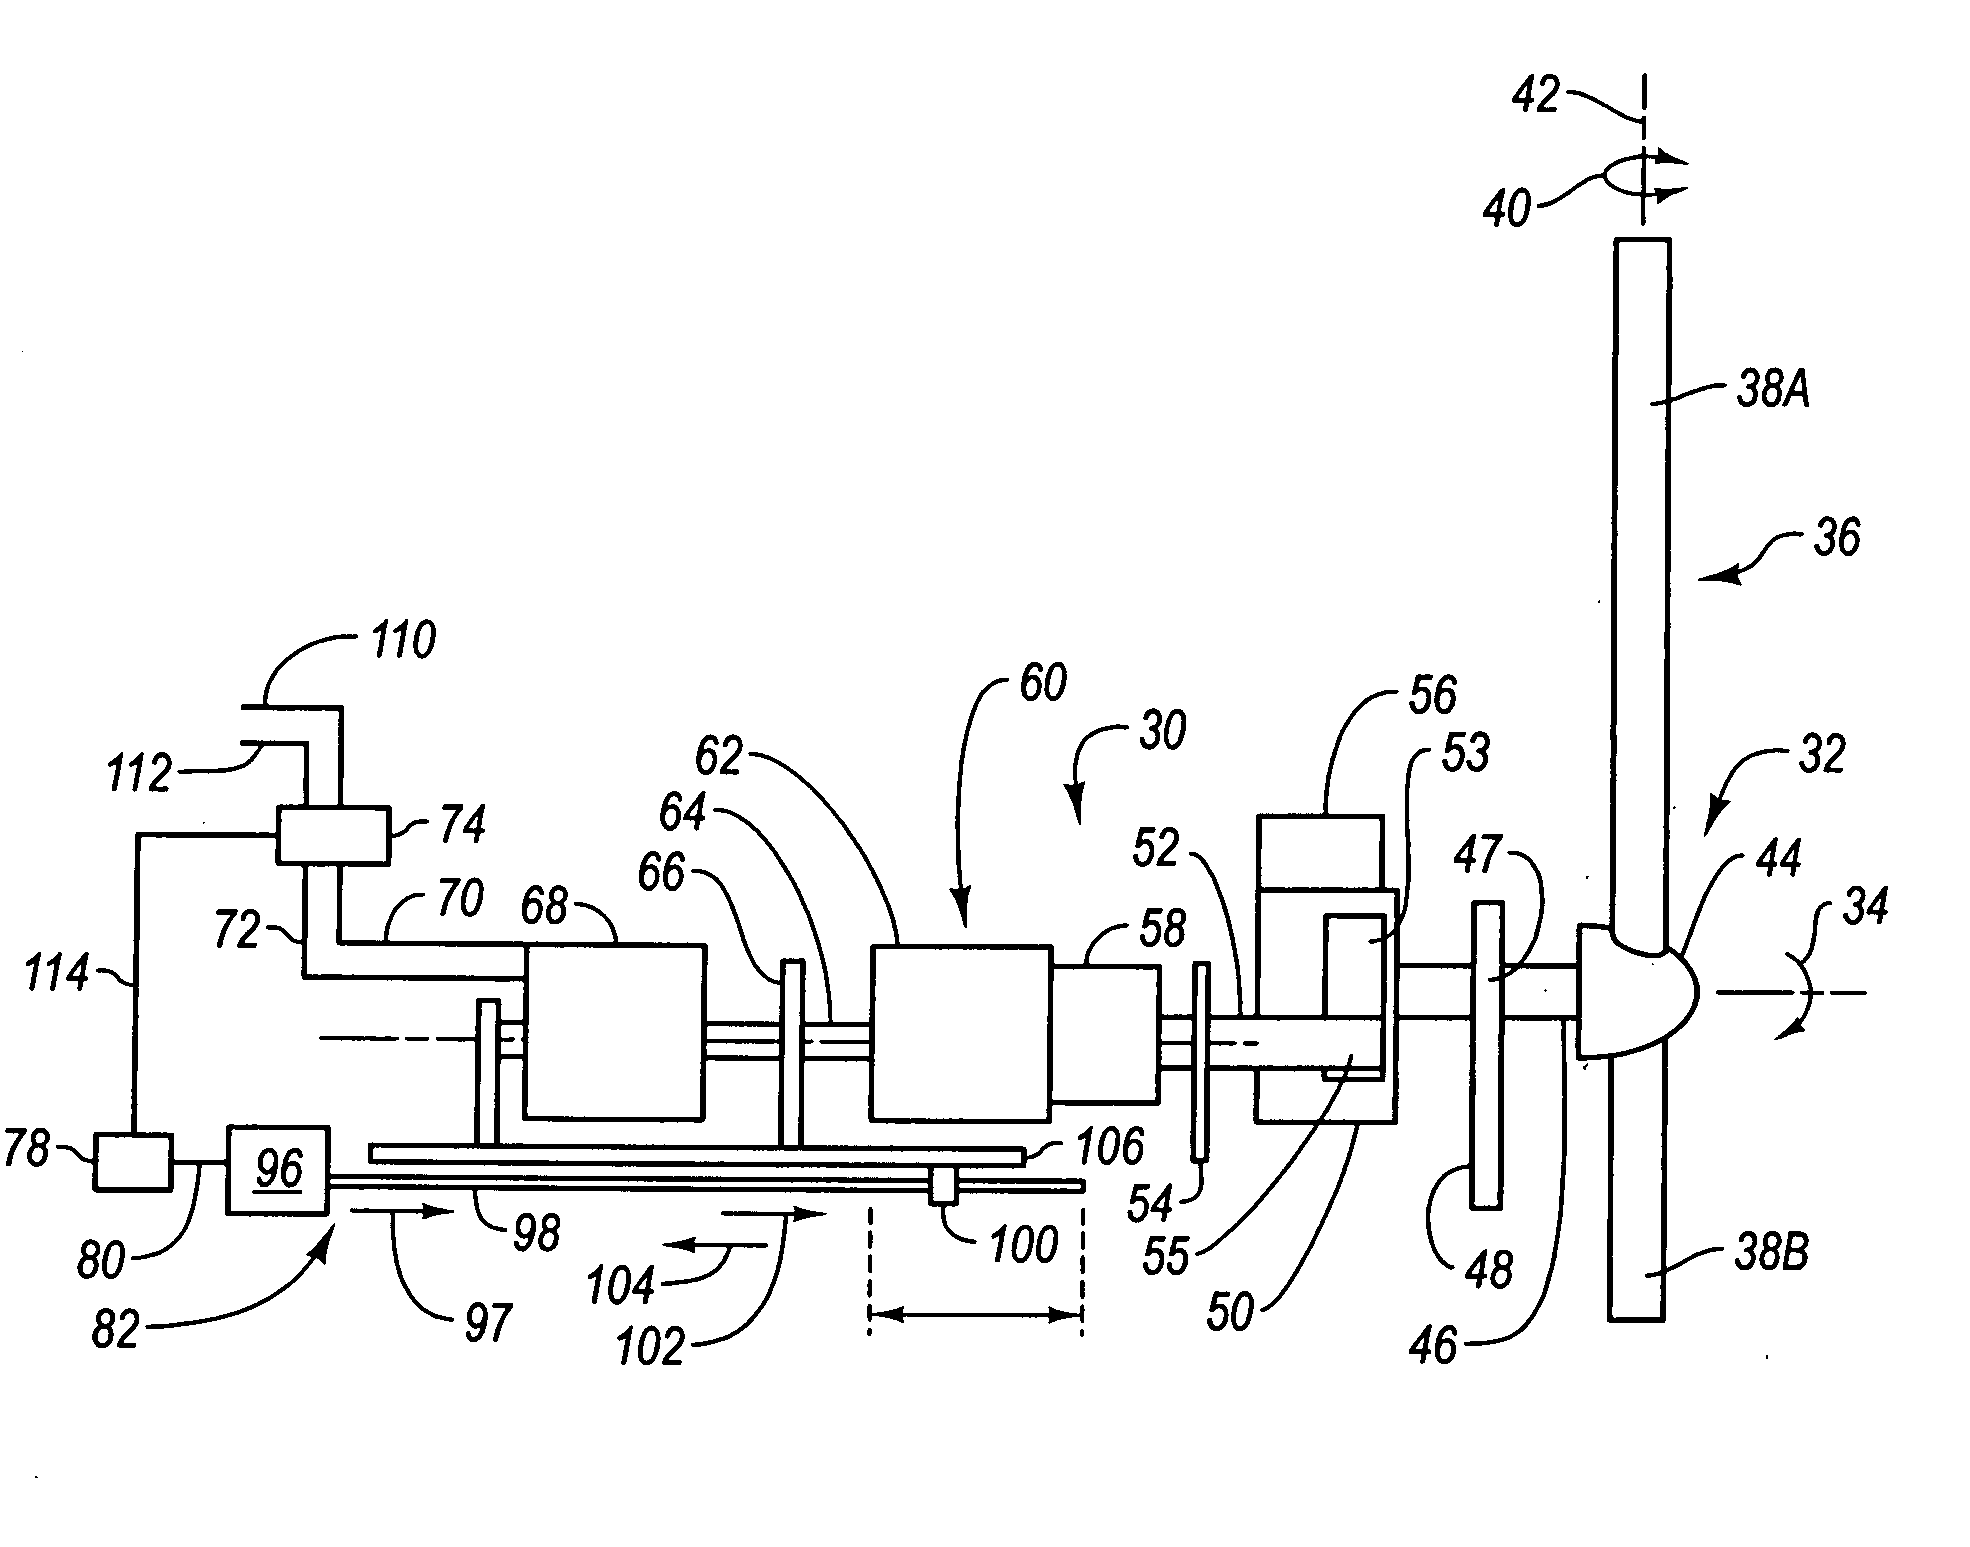 System for generating constant speed output from variable speed input